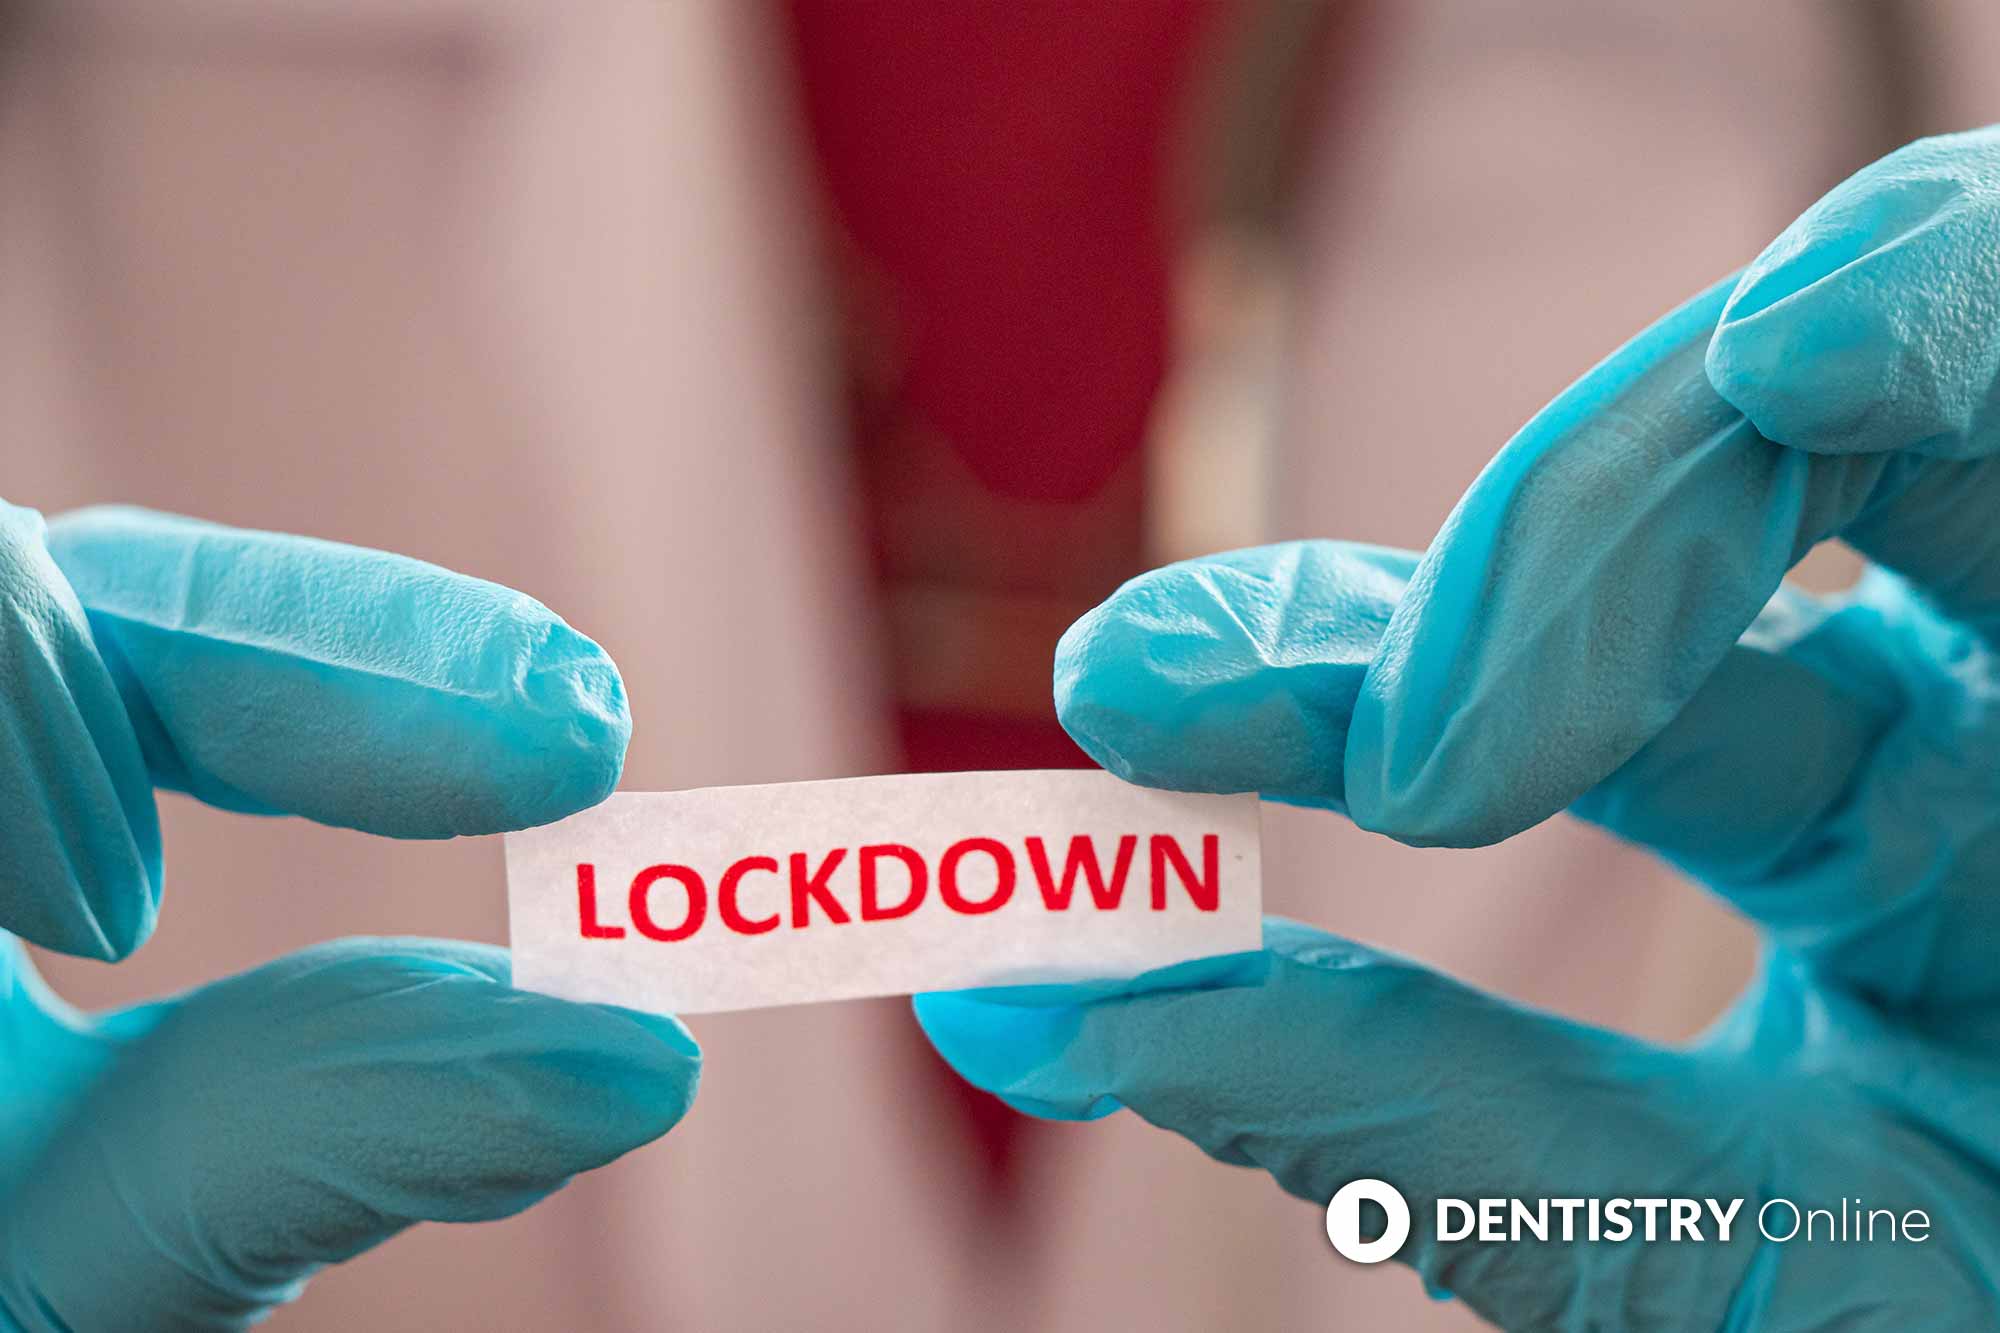 The dental profession is urging the government to rethink new NHS contract targets in the face of the new national lockdown